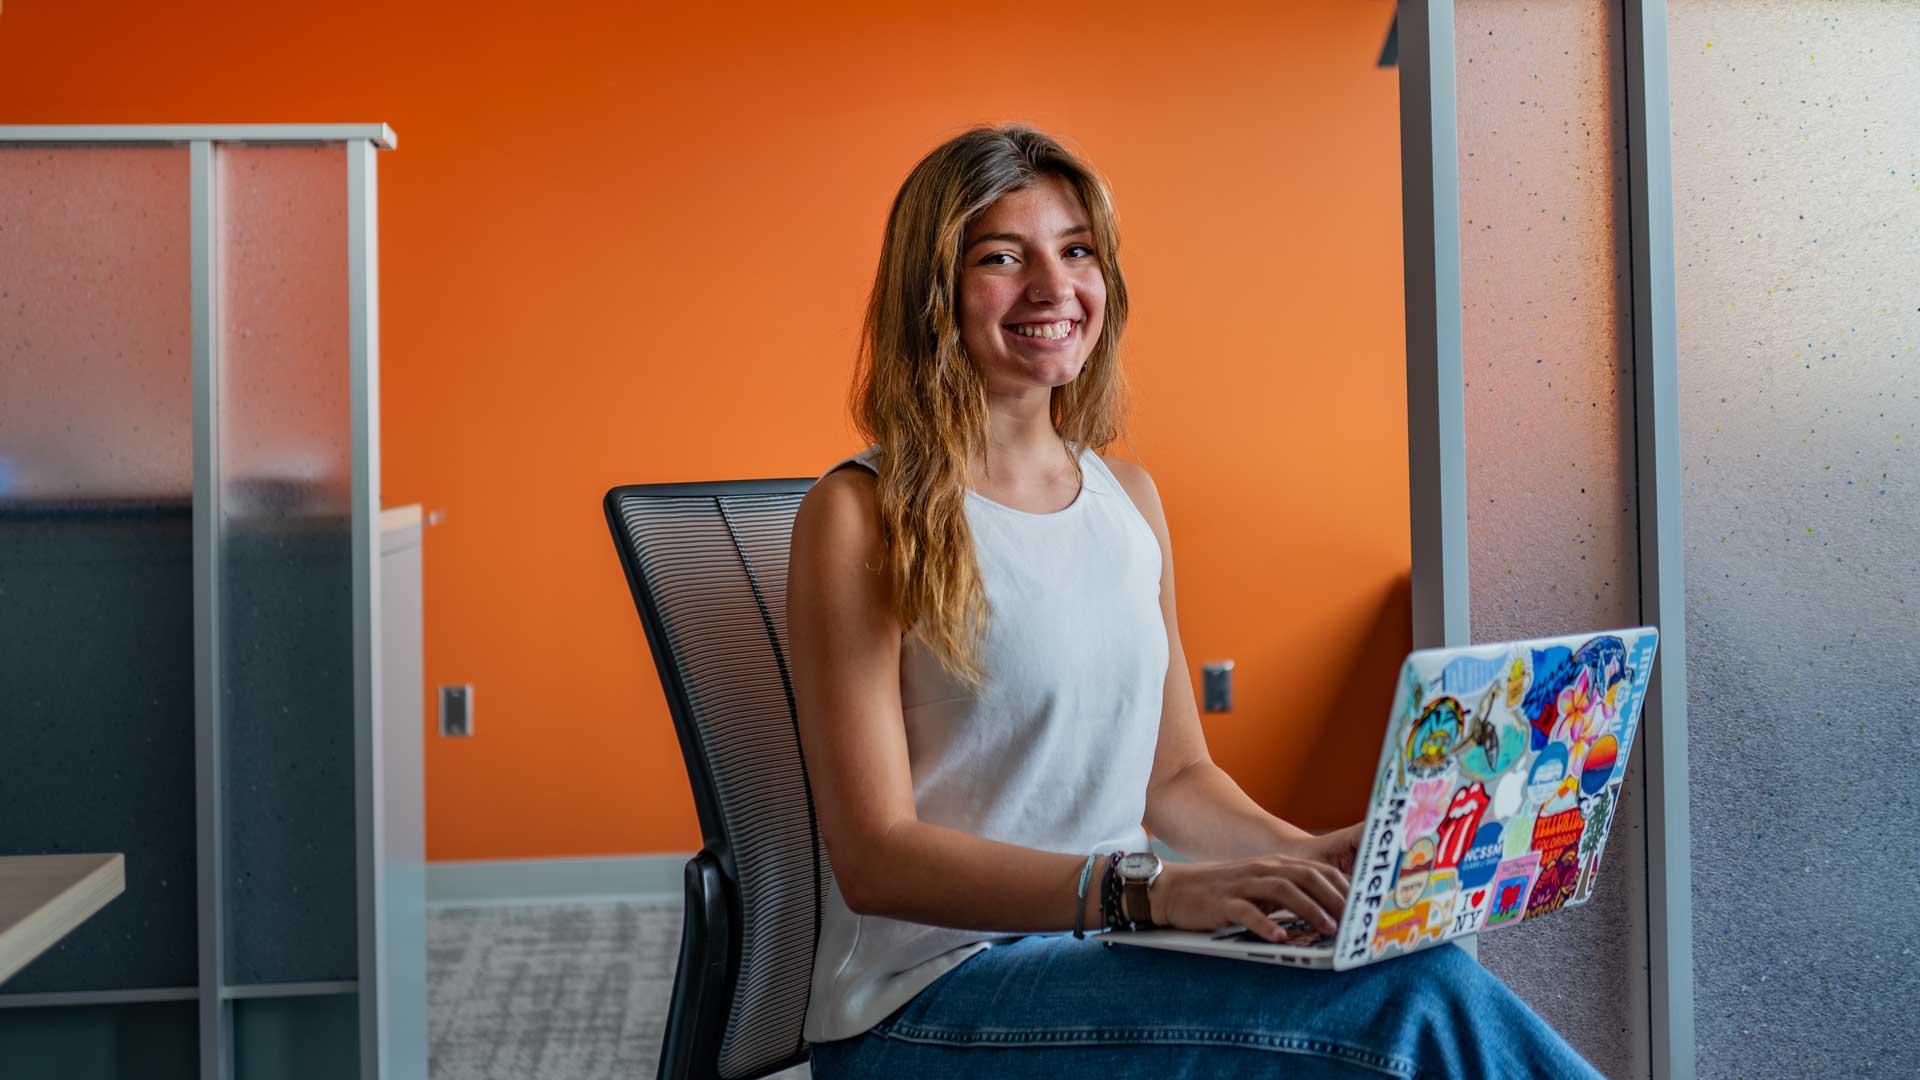 A blonde female student in a white top and denim skirt sits with a laptop on her knees in an office with gray cubicle walls in front of an orange wall.